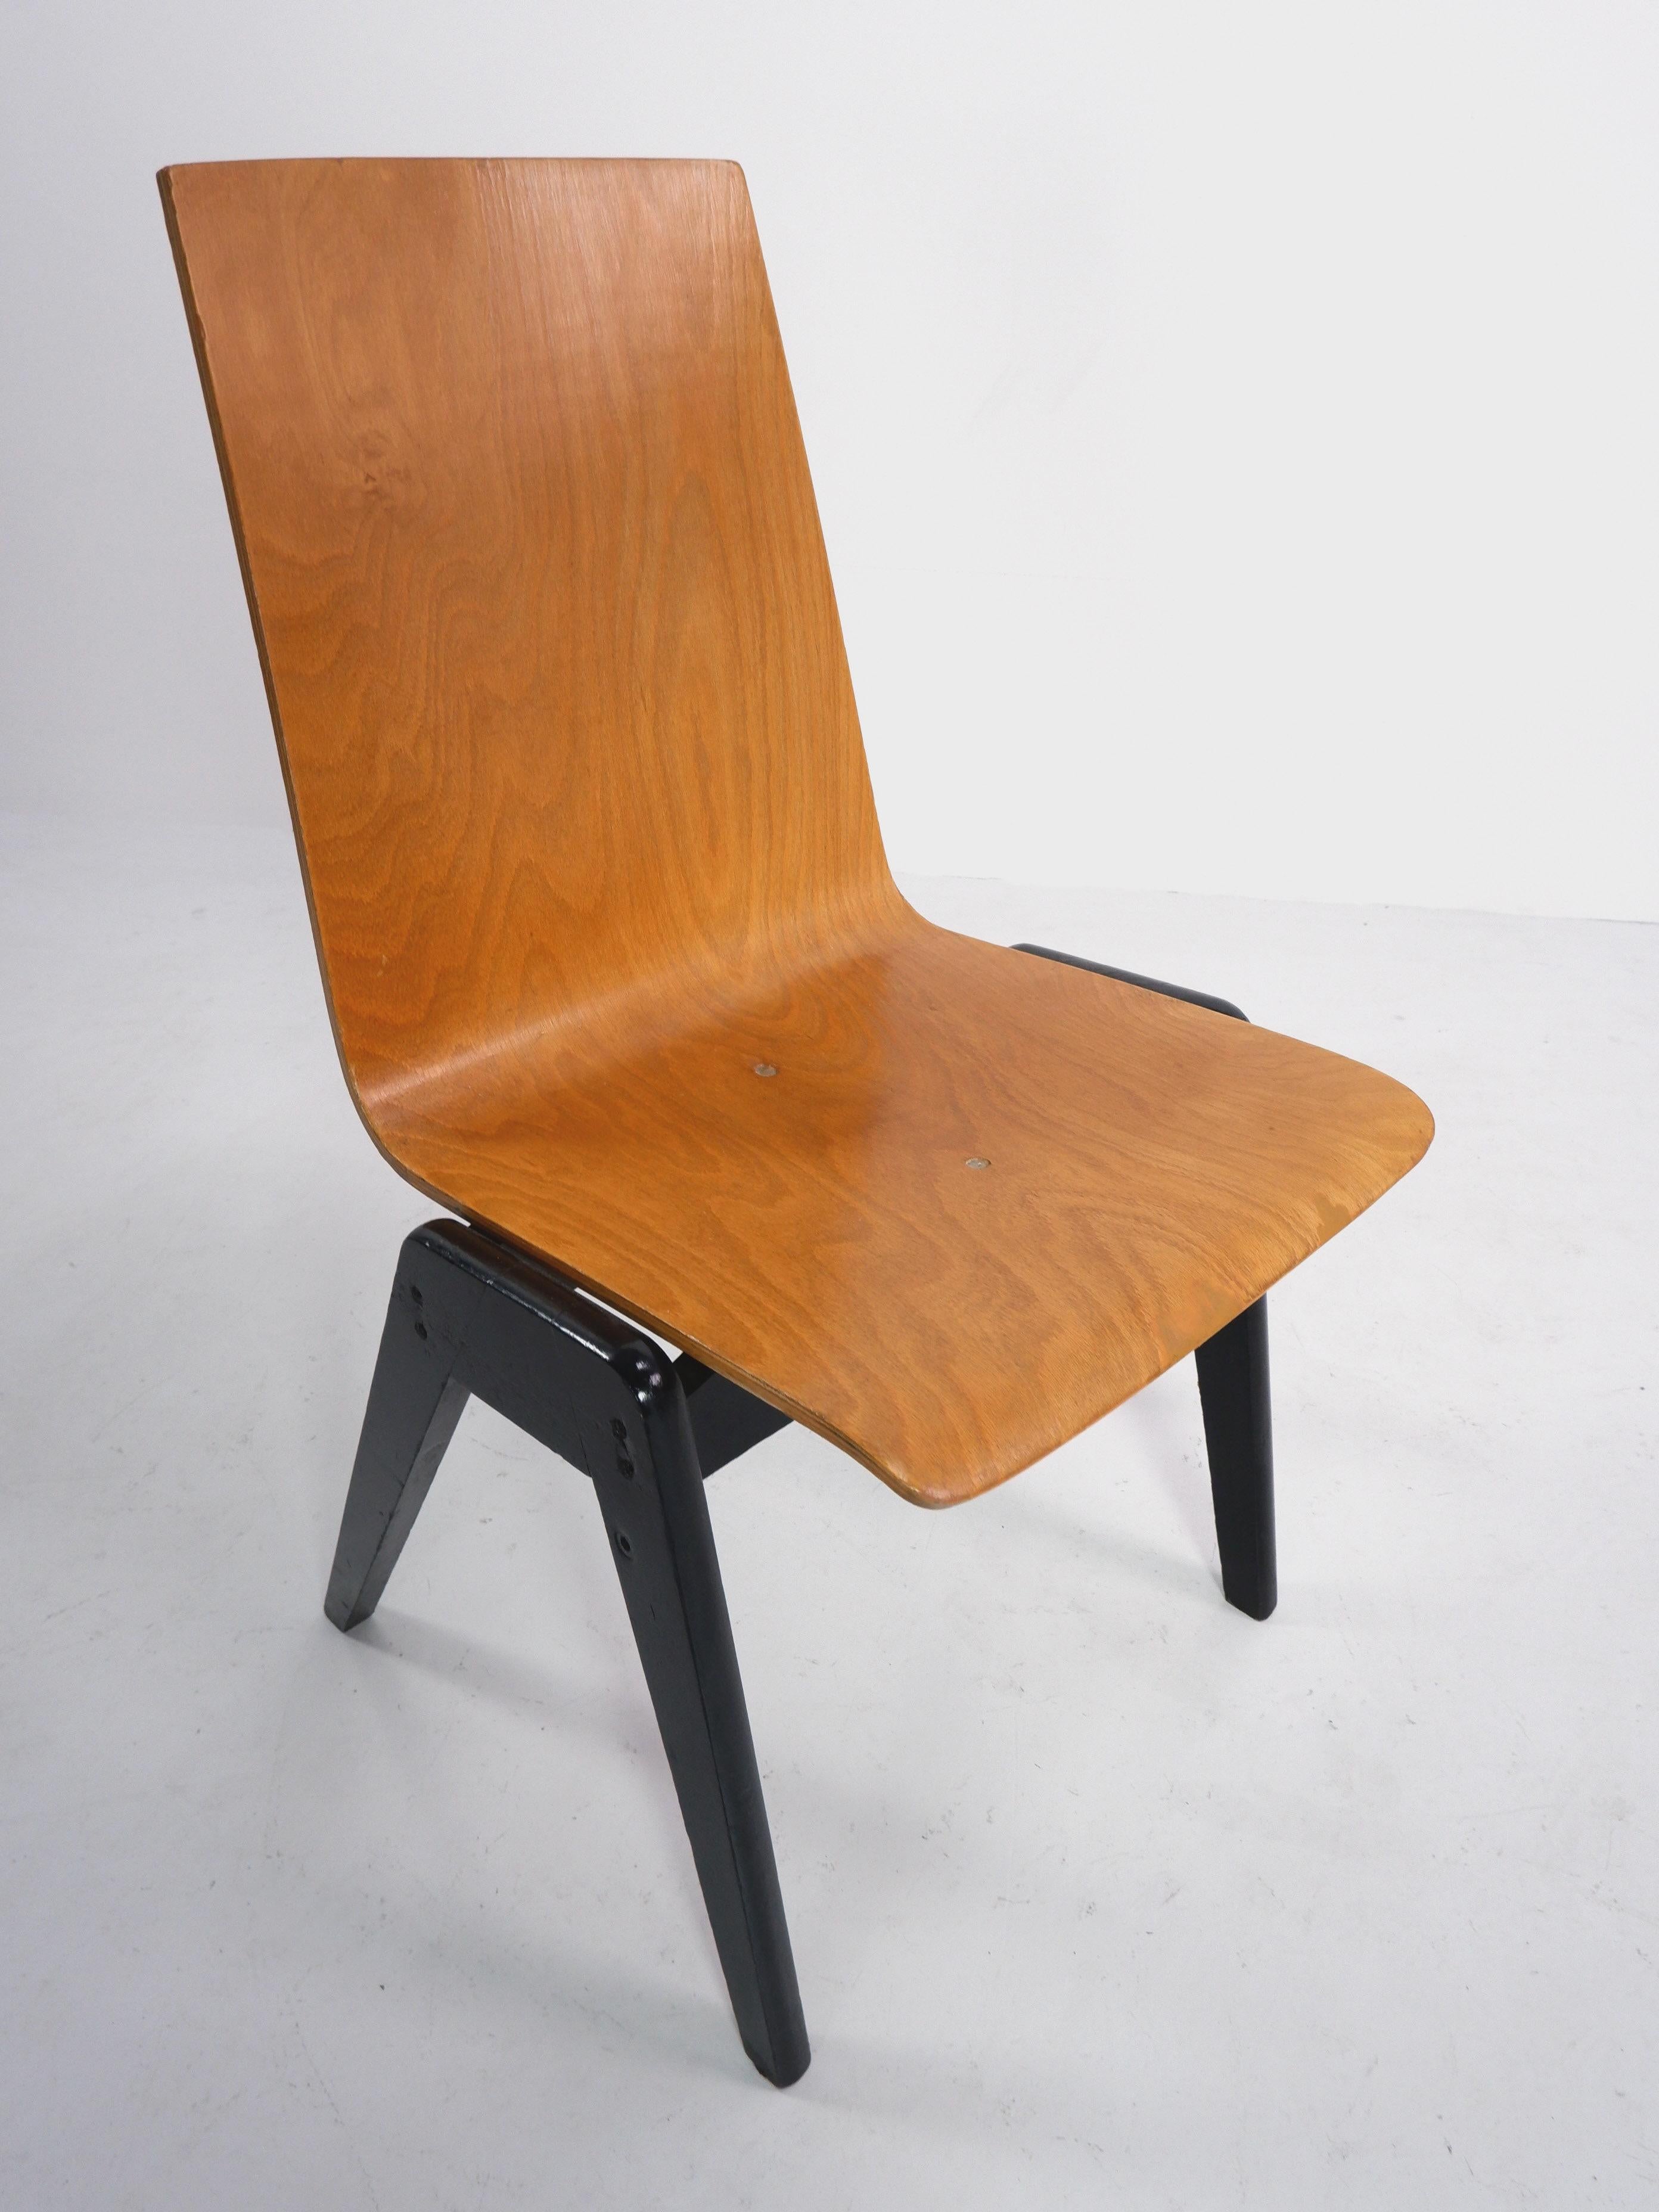 Austrian Plywood Stacking Chairs attrb. Roland Rainer, c.1950 For Sale